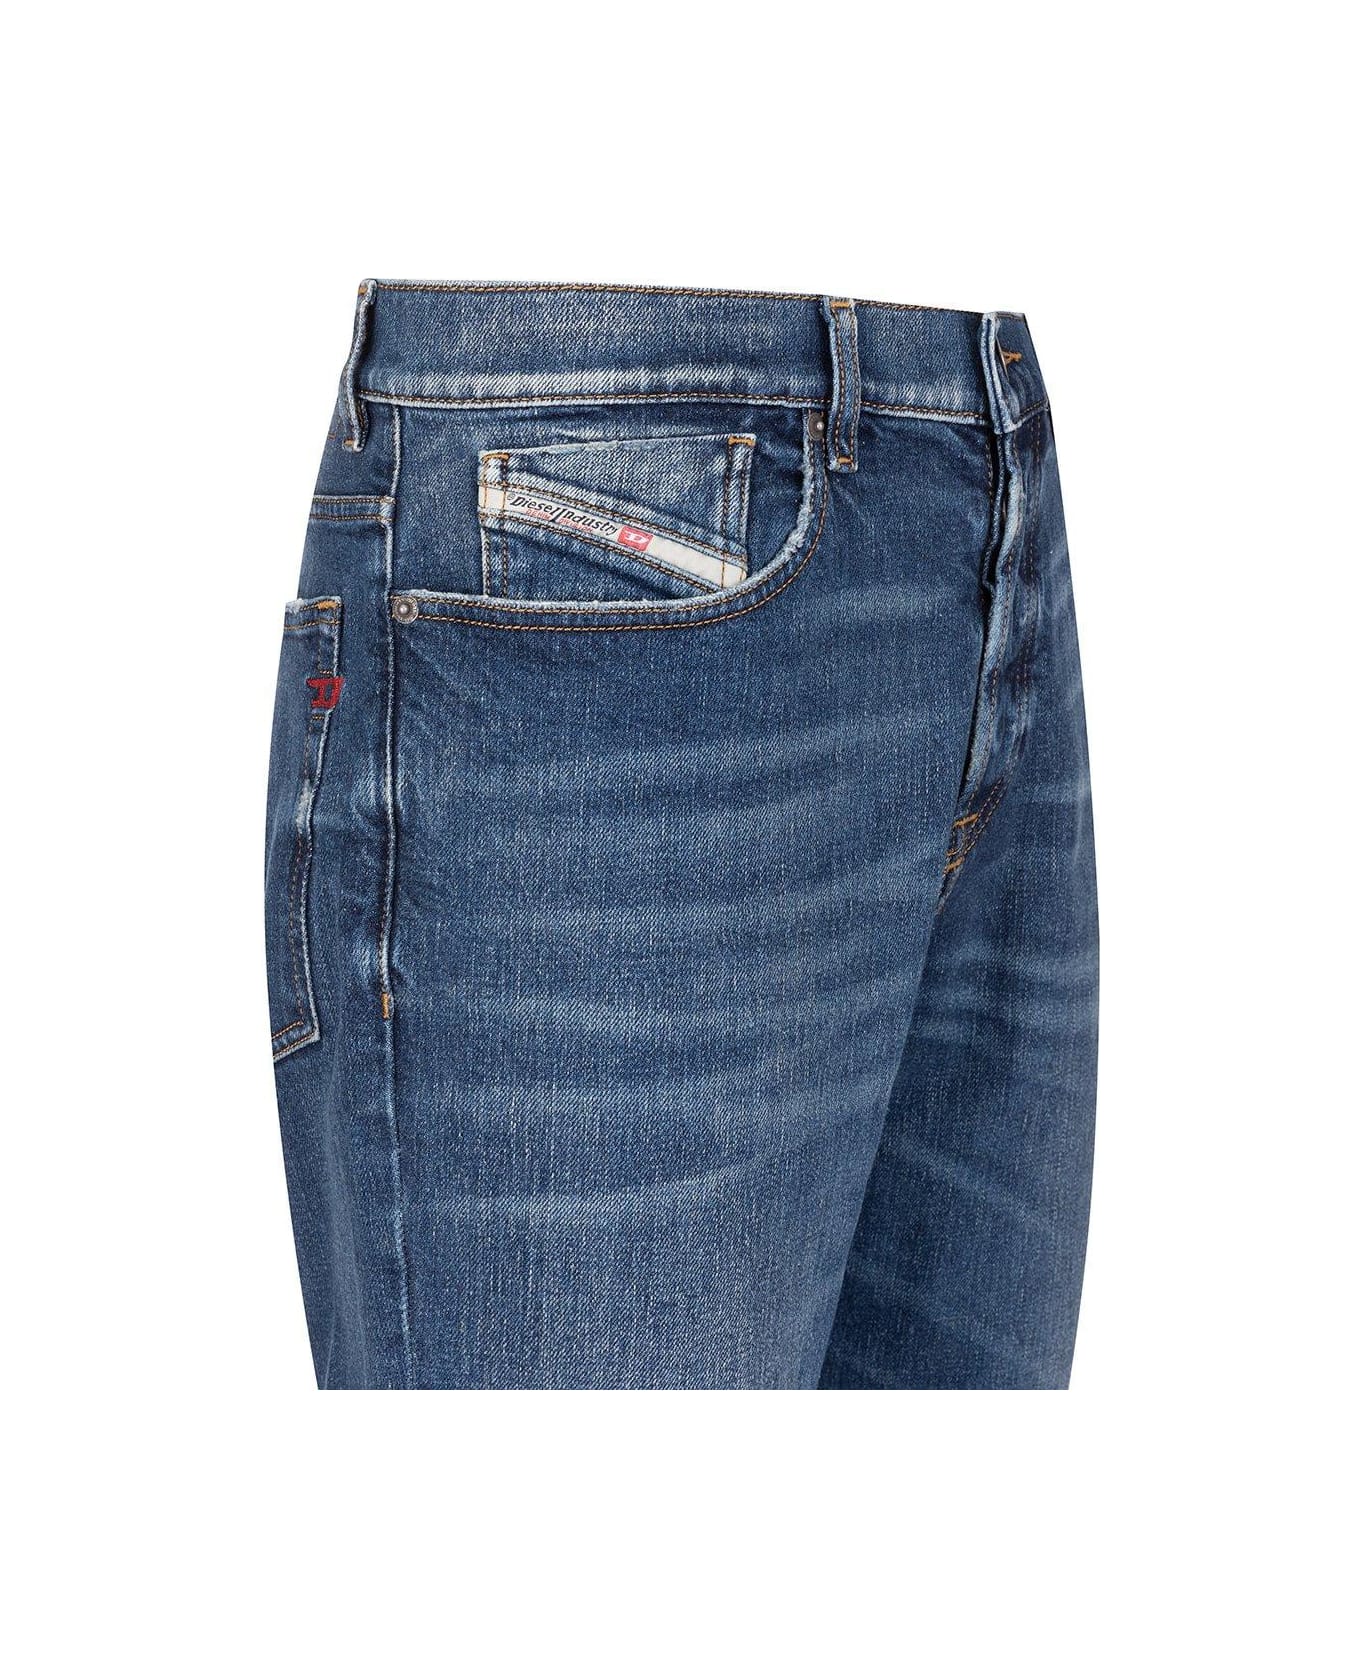 Diesel Logo Patch 2005 D-fining Tapered Leg Jeans